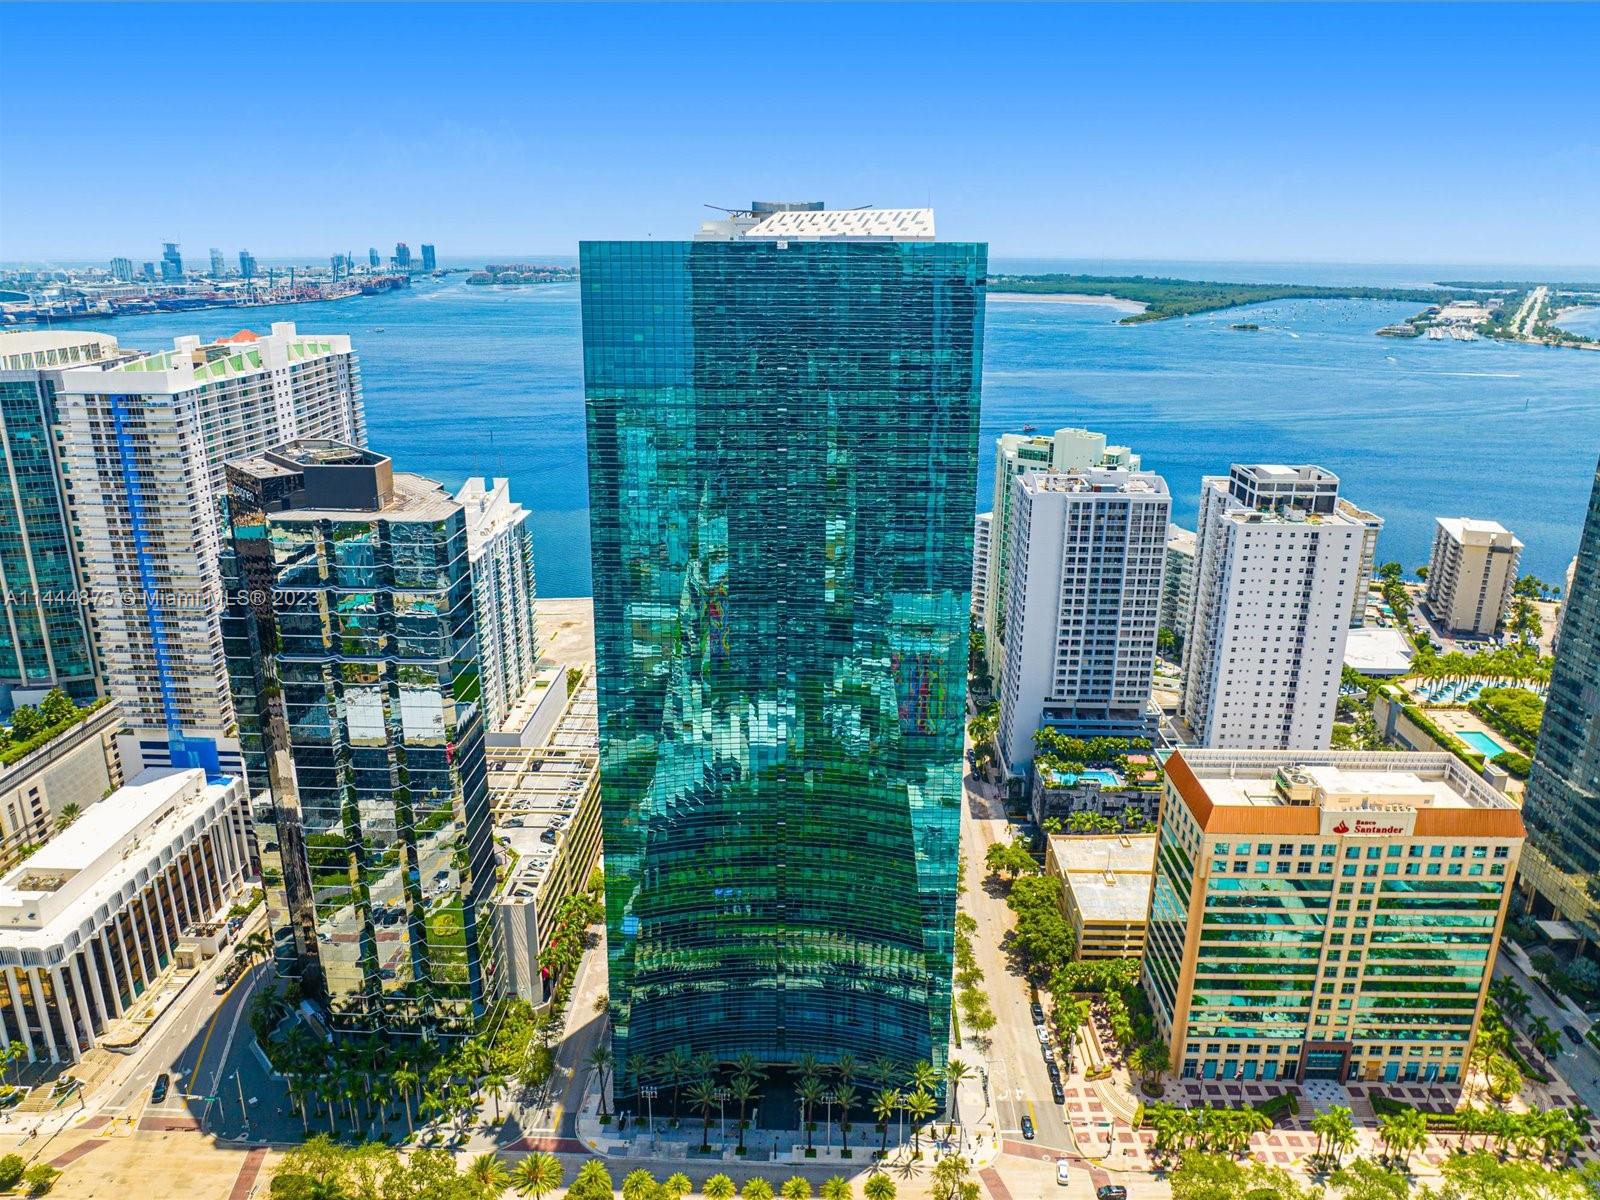 CALLING ALL INVESTORS! Unit available with long term tenant on PRESTIGIOUS BRICKELL AVENUE. The bldg has just completed a multi-million$ renovation & features a new bar + restaurant with bay views in its Sky Lobby, a gym, full spa, rooftop pool & bar, plus bellman & valet service. This TURNKEY CONDO is furnished, has a washer+dryer and features a combination of marble, carpet & bamboo flooring. The unit features views of the city skyline & of the bay. Residents can self-park in the covered garage or valet as they wish. Located walking distance to all that the Brickell area has to offer but on the outskirts of the highly trafficked areas. This unit can be rented long term or short term/Airbnb. AN IDEAL INVESTMENT PROPERTY or PRIVATE BRICKELL RESIDENCE!